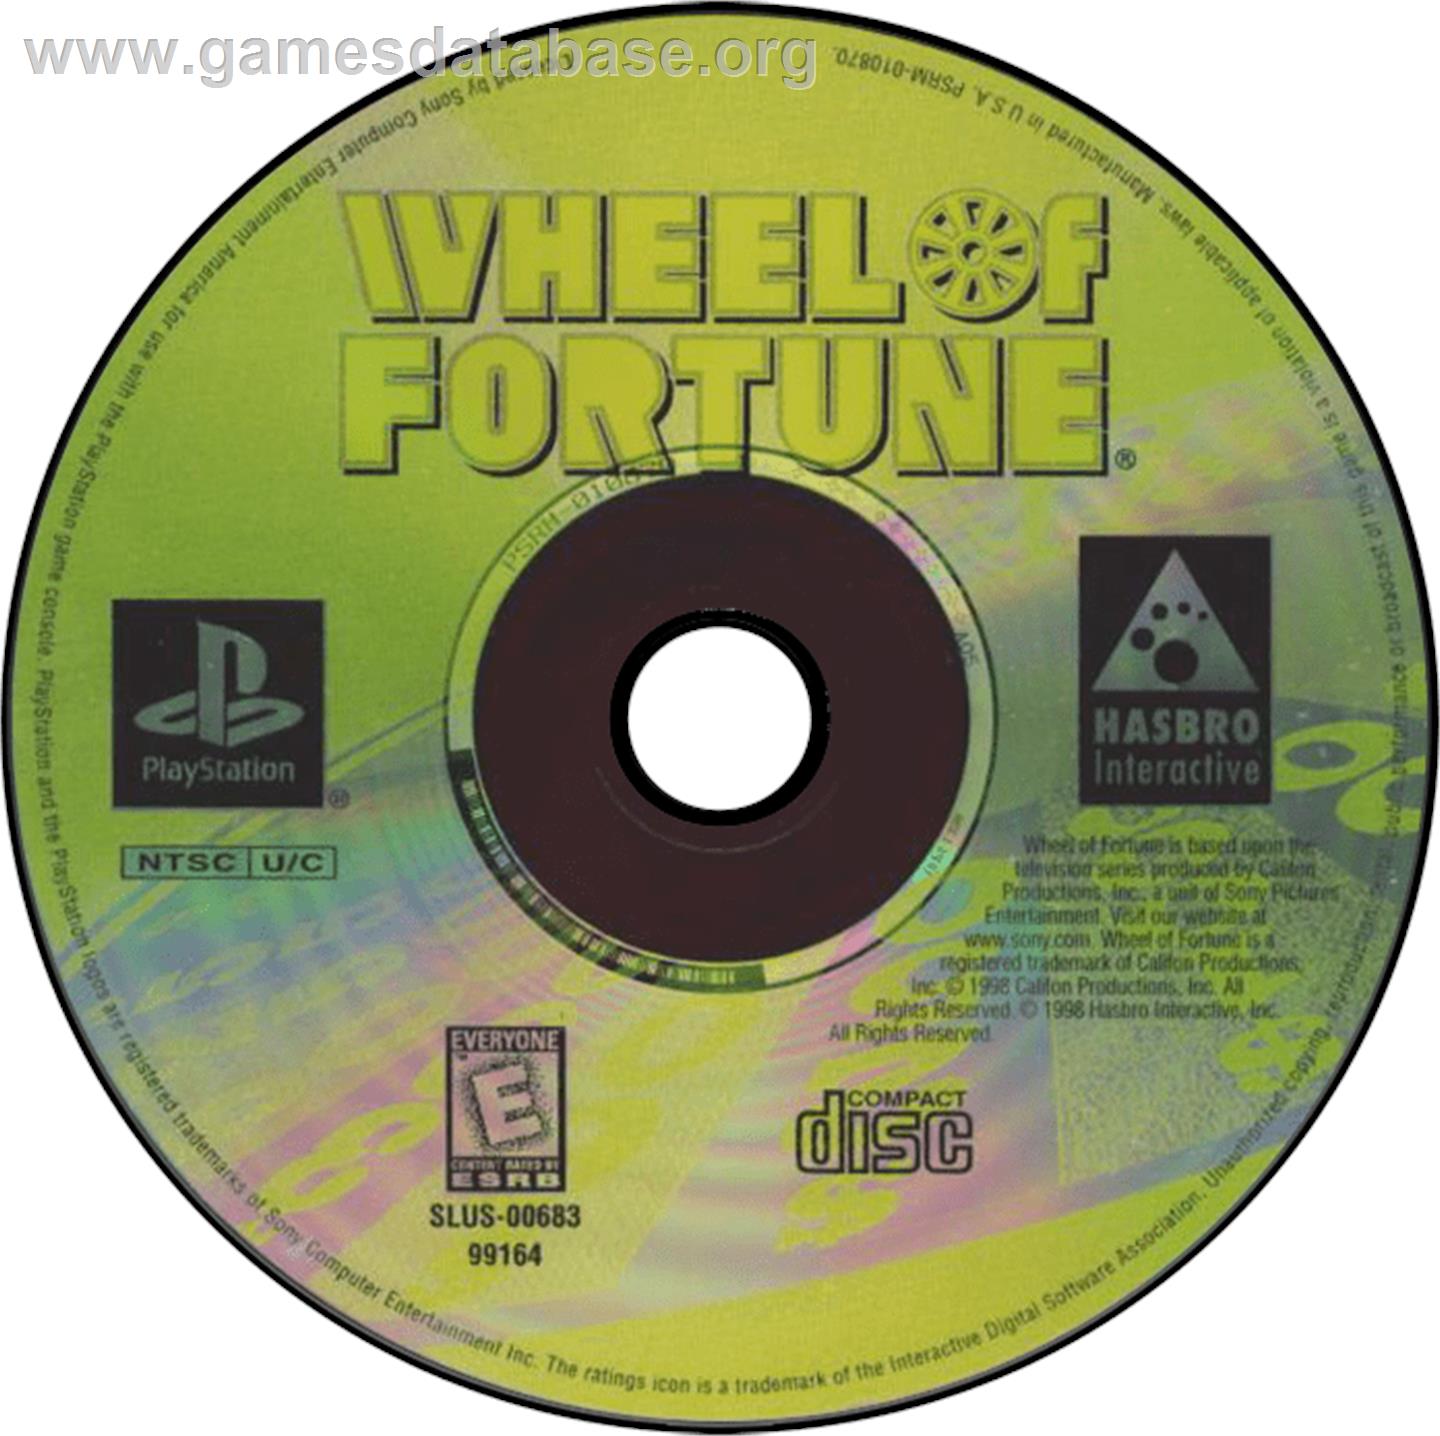 Wheel of Fortune - Sony Playstation - Artwork - Disc